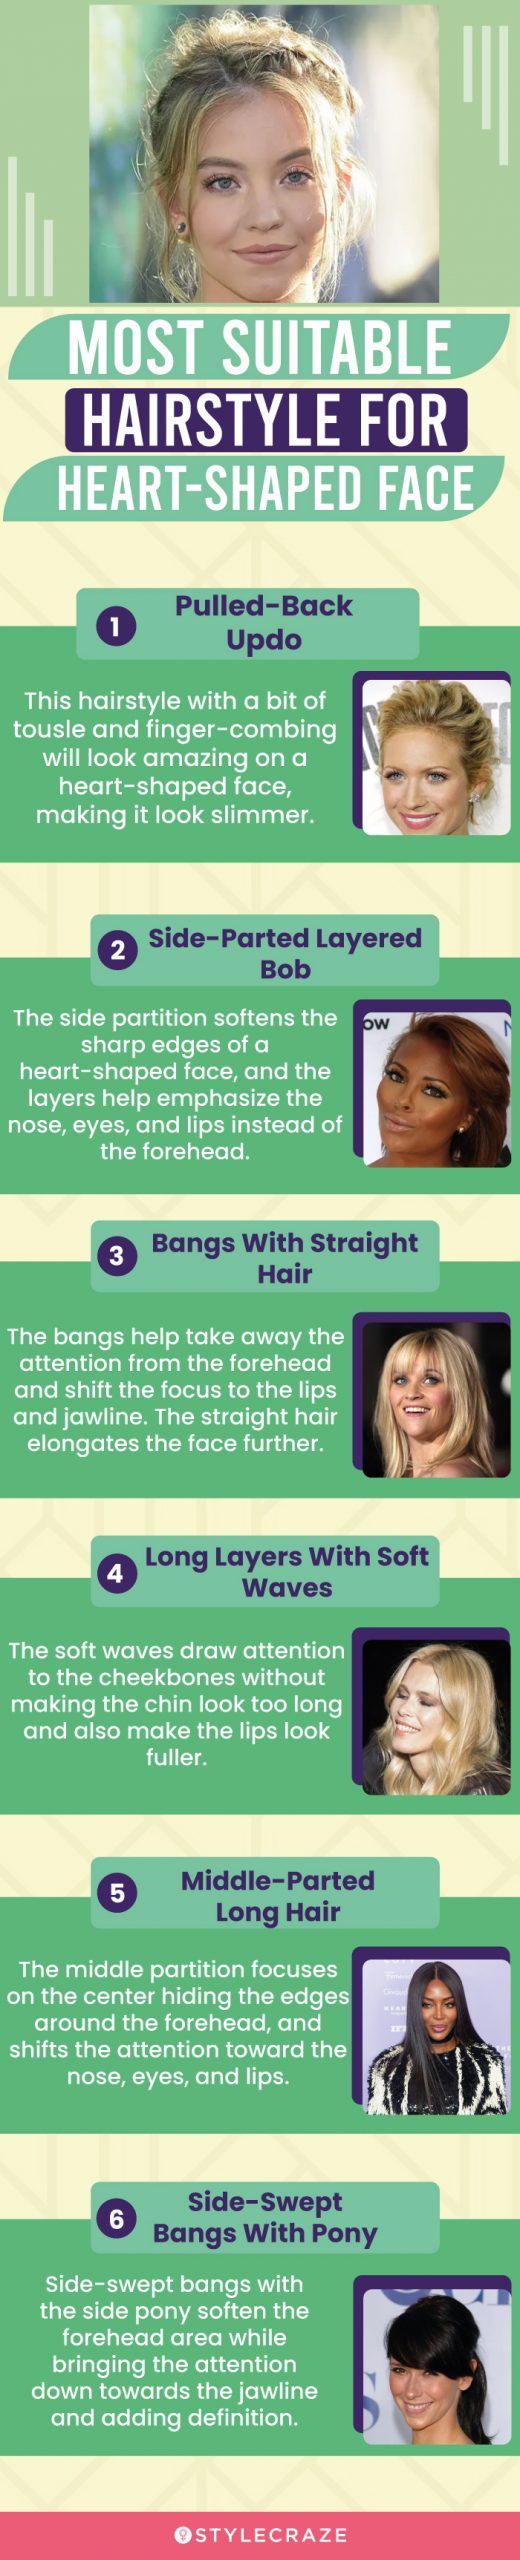 most suitable hairstyle for heart shape face (infographic)